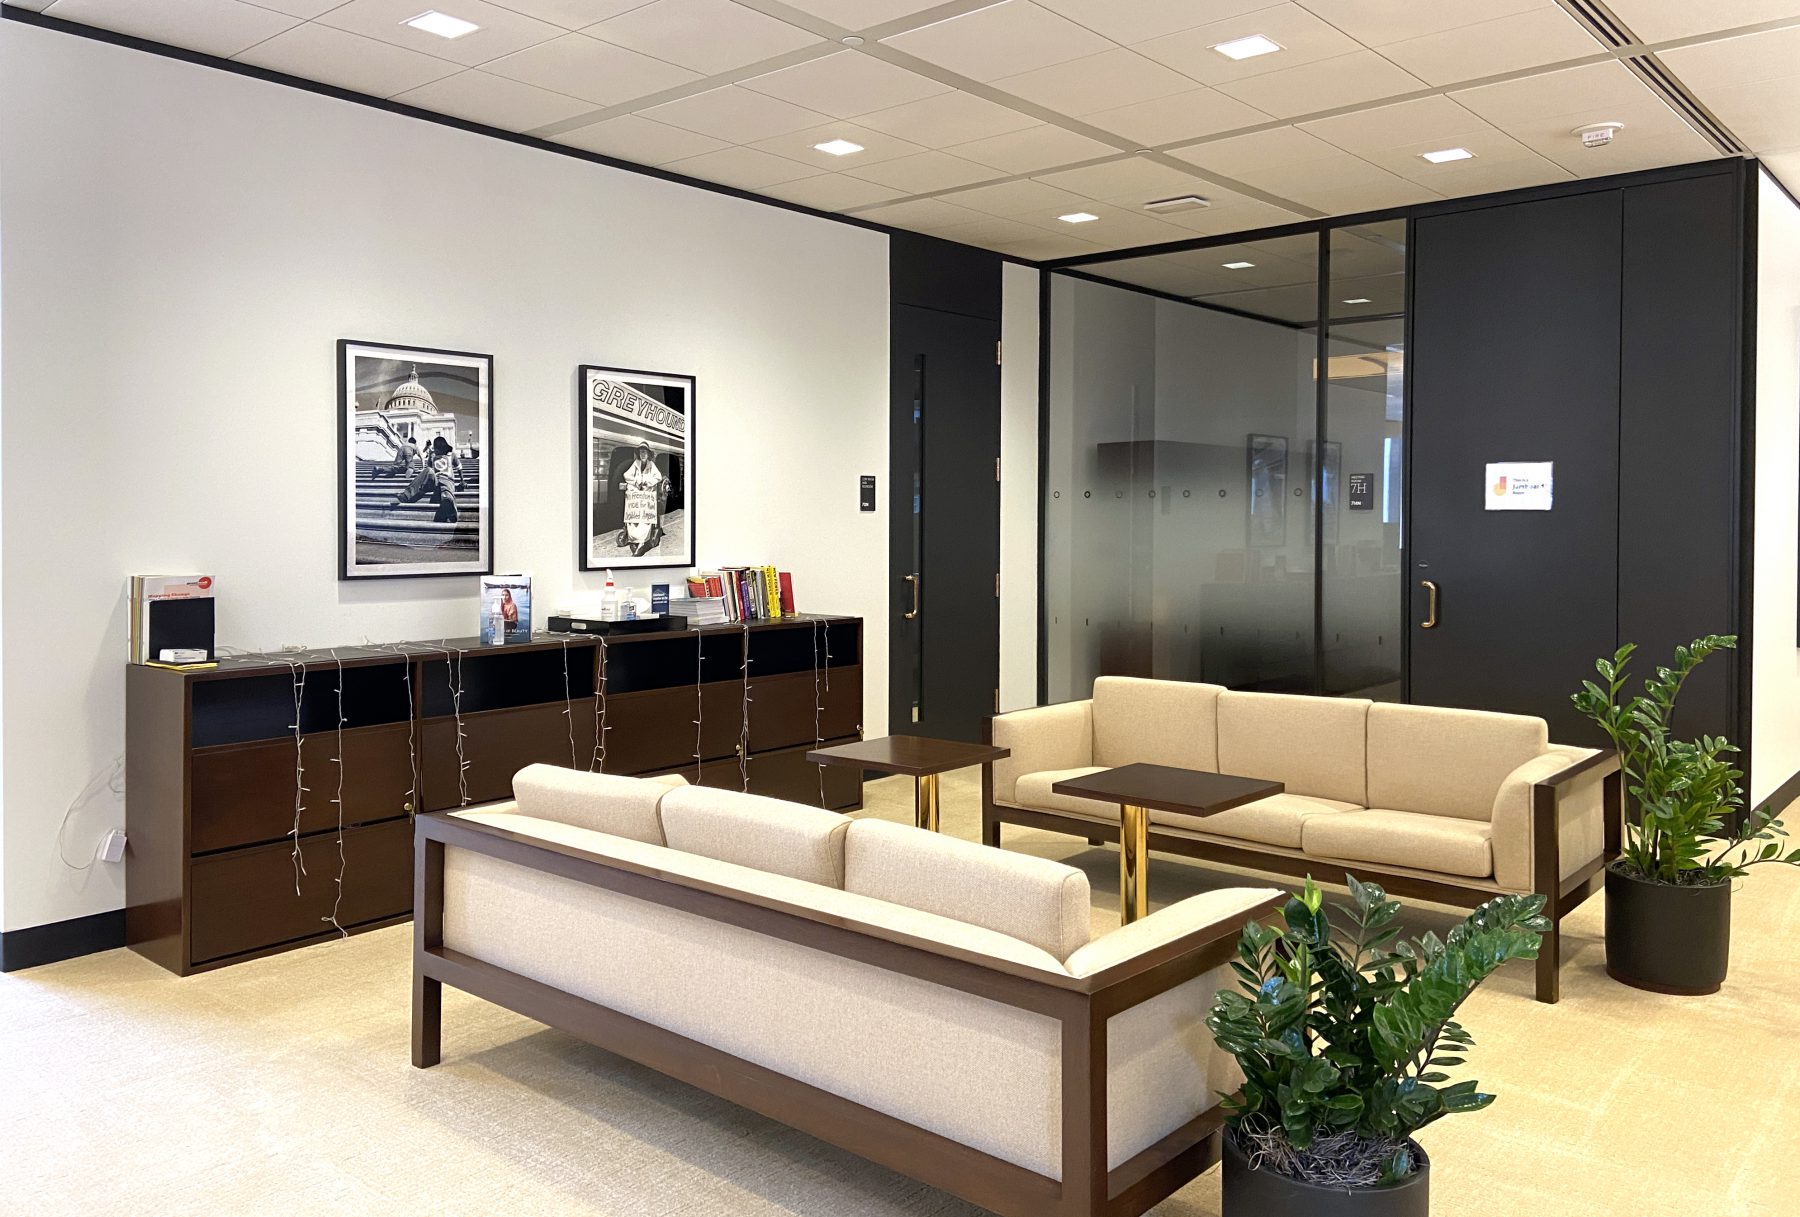 Office lobby with beige couches and black and white photos of Tom Olin photos on the wall